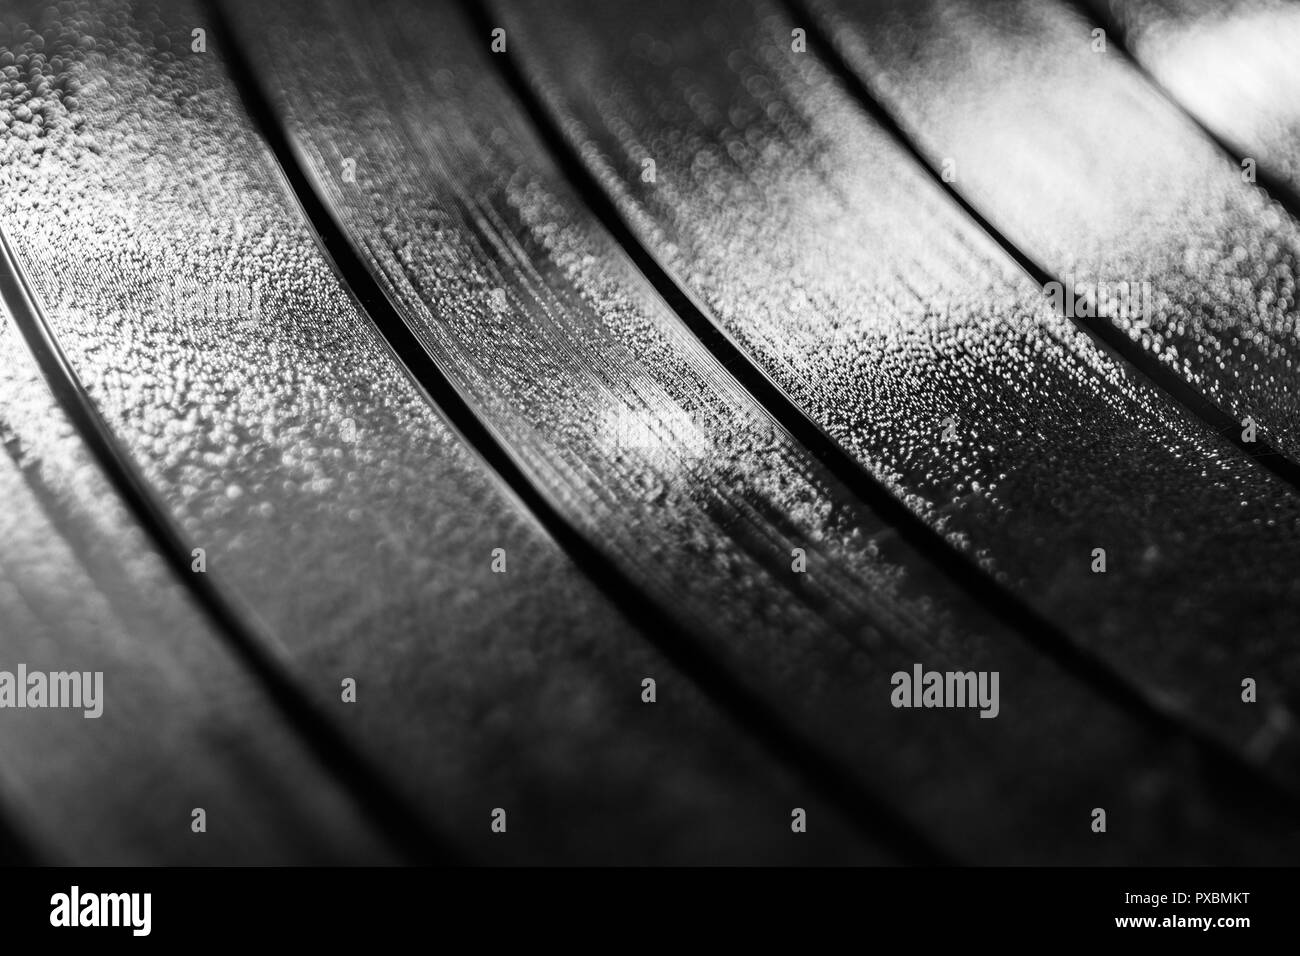 Vinyl LP Record grooves for musical background II Stock Photo - Alamy